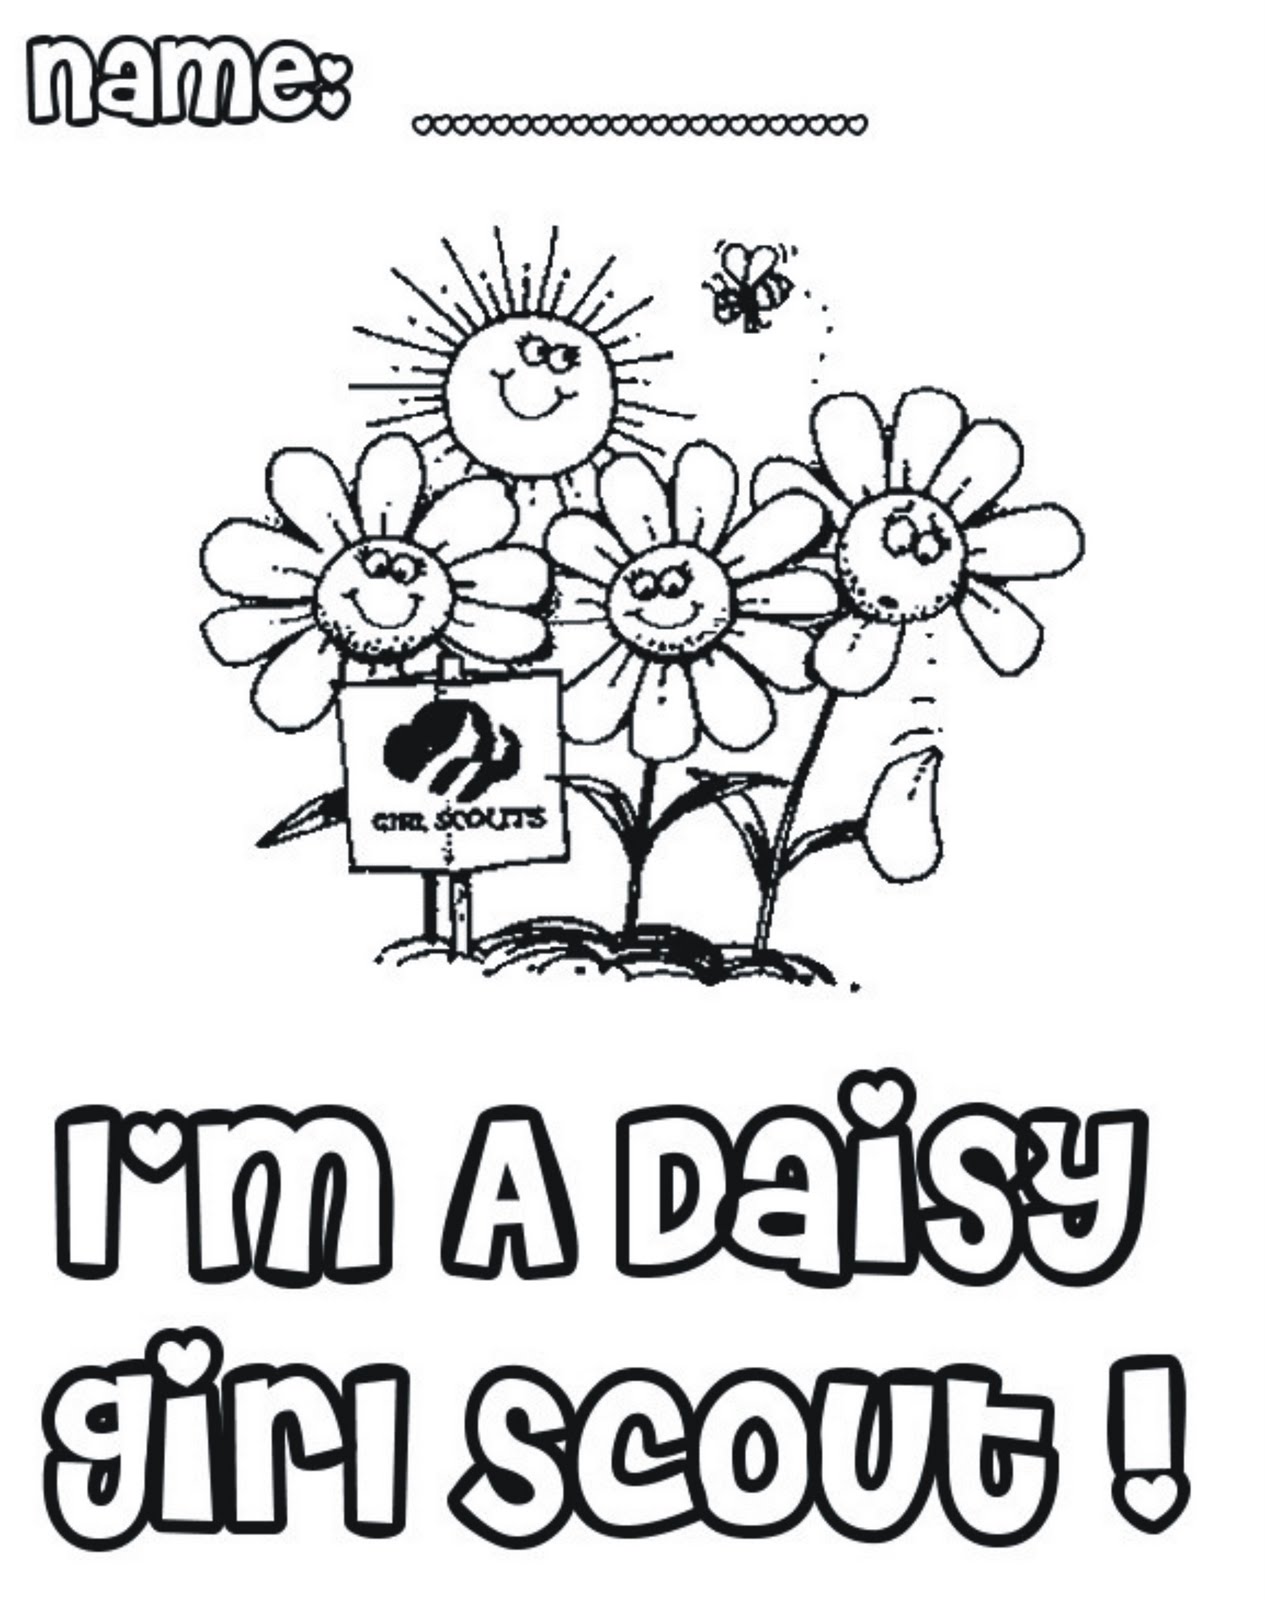 daisy petals meaning coloring pages - photo #50